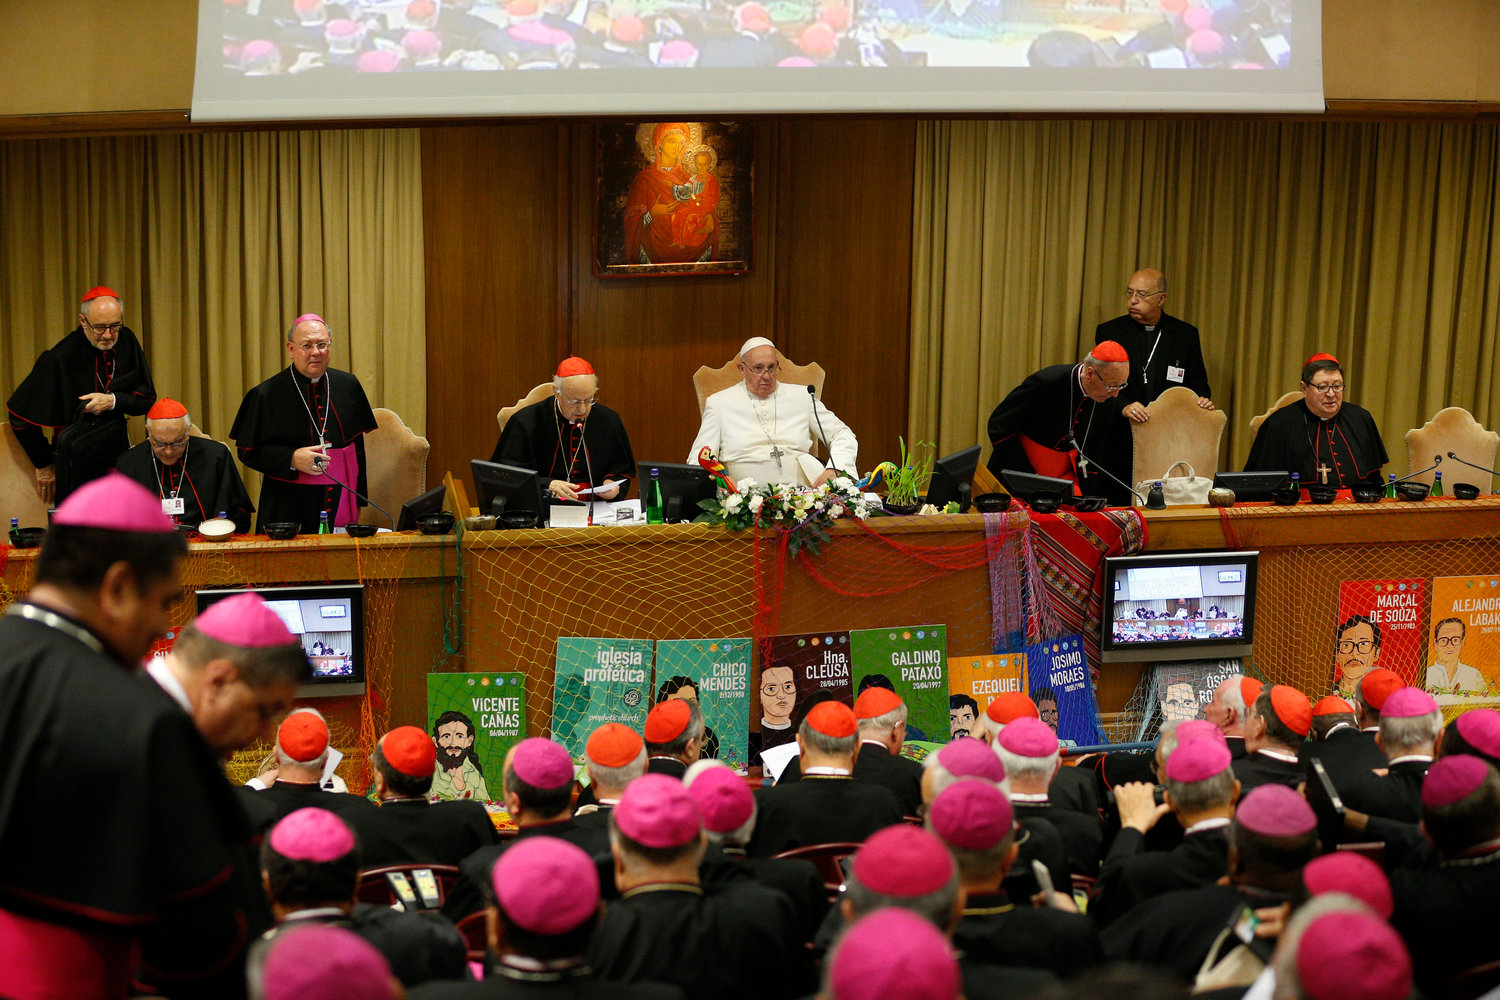 Pope Francis attends the final session of the Synod of Bishops for the Amazon at the Vatican in this Oct. 26, 2019, file photo. The Vatican on Feb. 12 released the Pope’s apostolic exhortation, “Querida Amazonia” (Beloved Amazonia), which offers his conclusions from the synod.